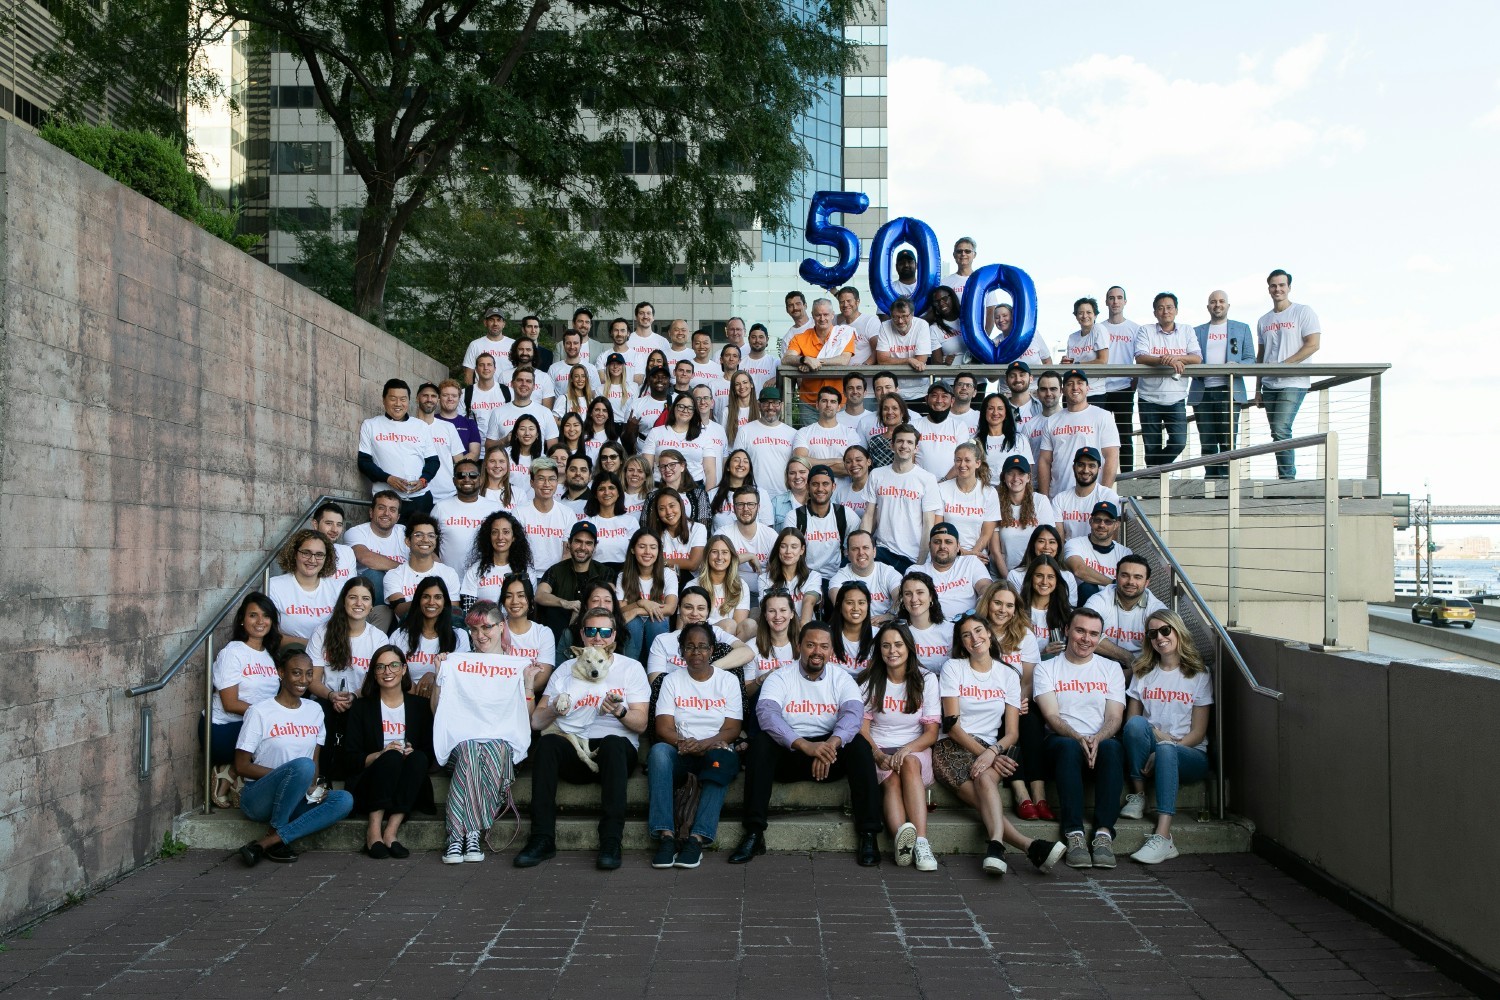 We celebrated our 500th employee and the opening of our new Global HQ at Elevated Acre in NYC